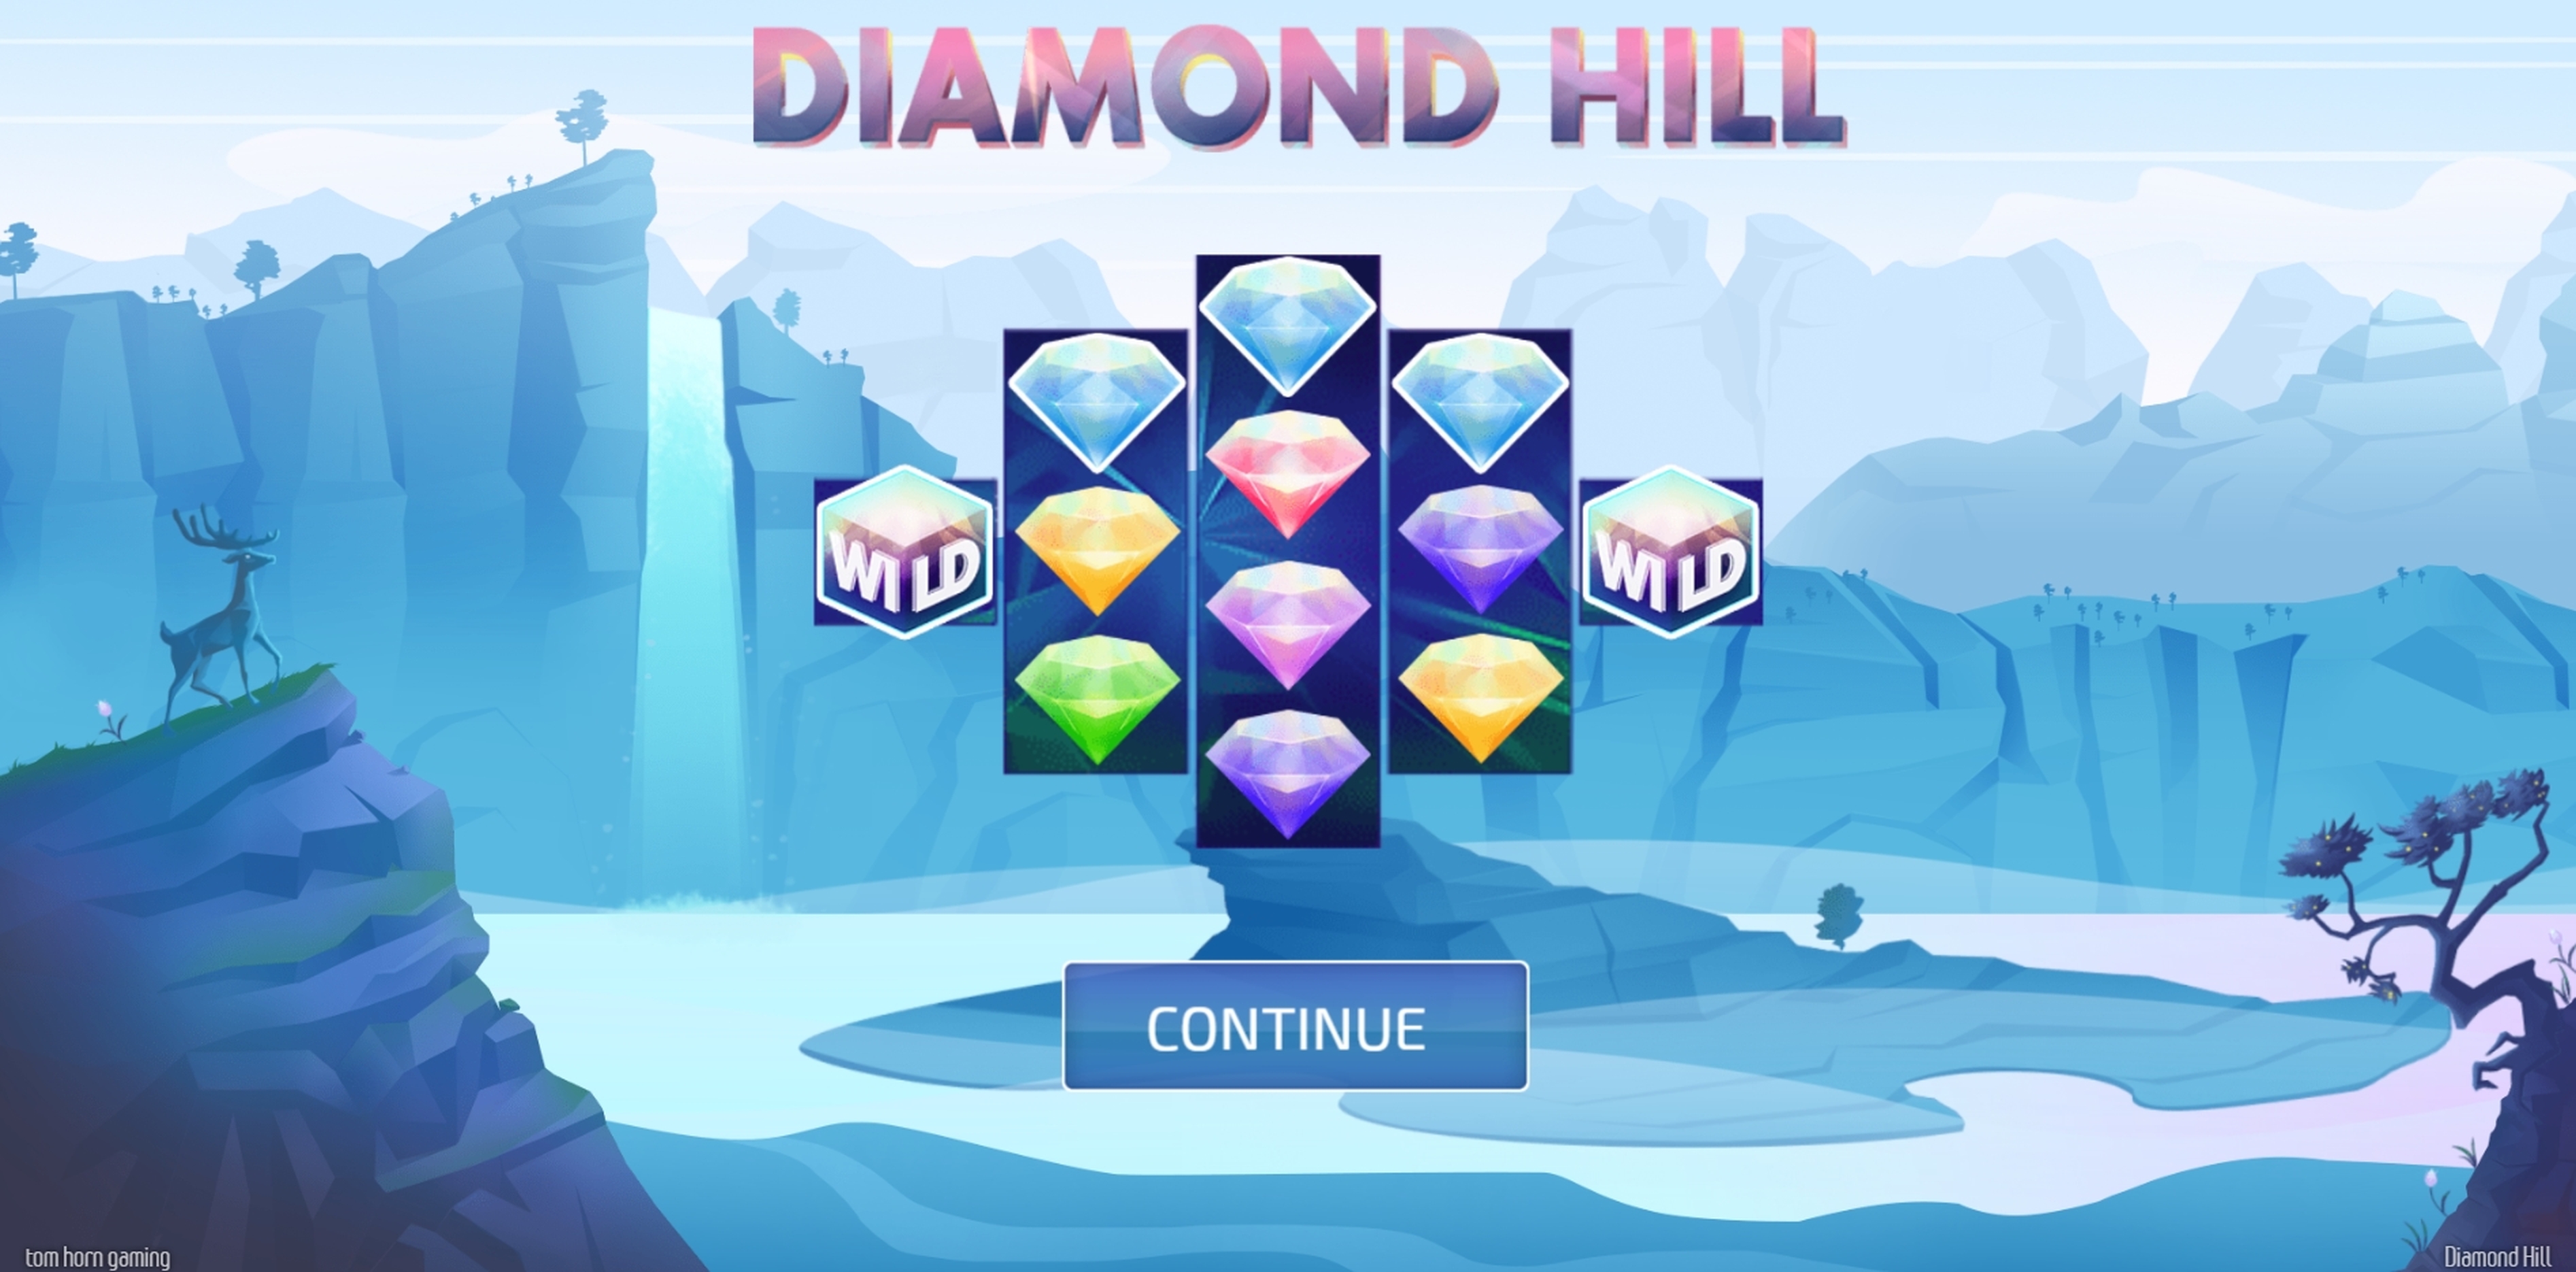 Play Diamond Hill Free Casino Slot Game by Tom Horn Gaming